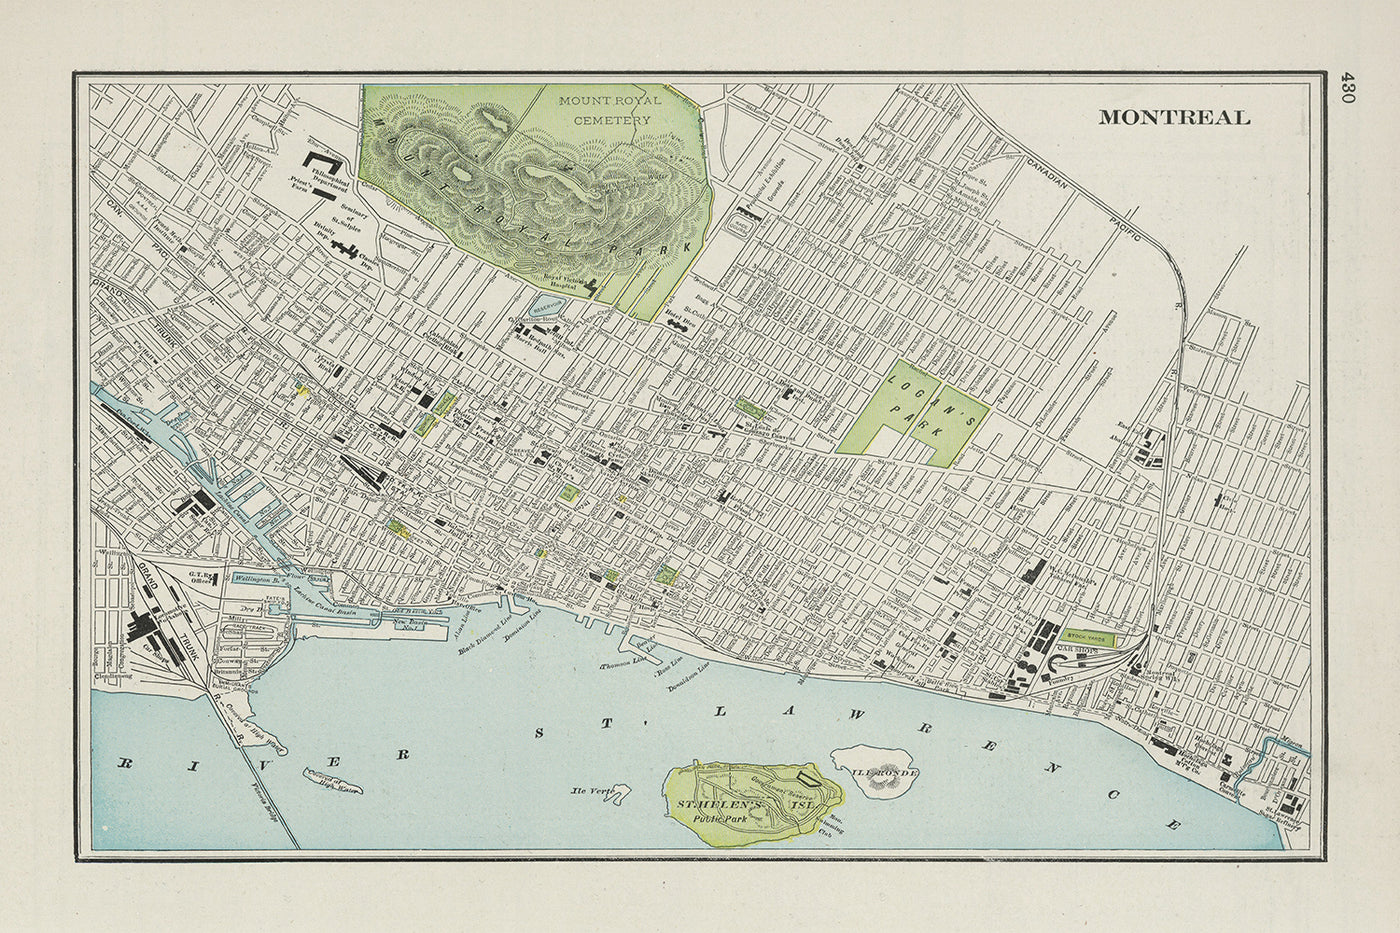 Old Map of Montreal by Cram, 1901: Mount Royal Park & Cemetery, St. Lawrence River, Old Montreal, McGill University, Lafontaine Park